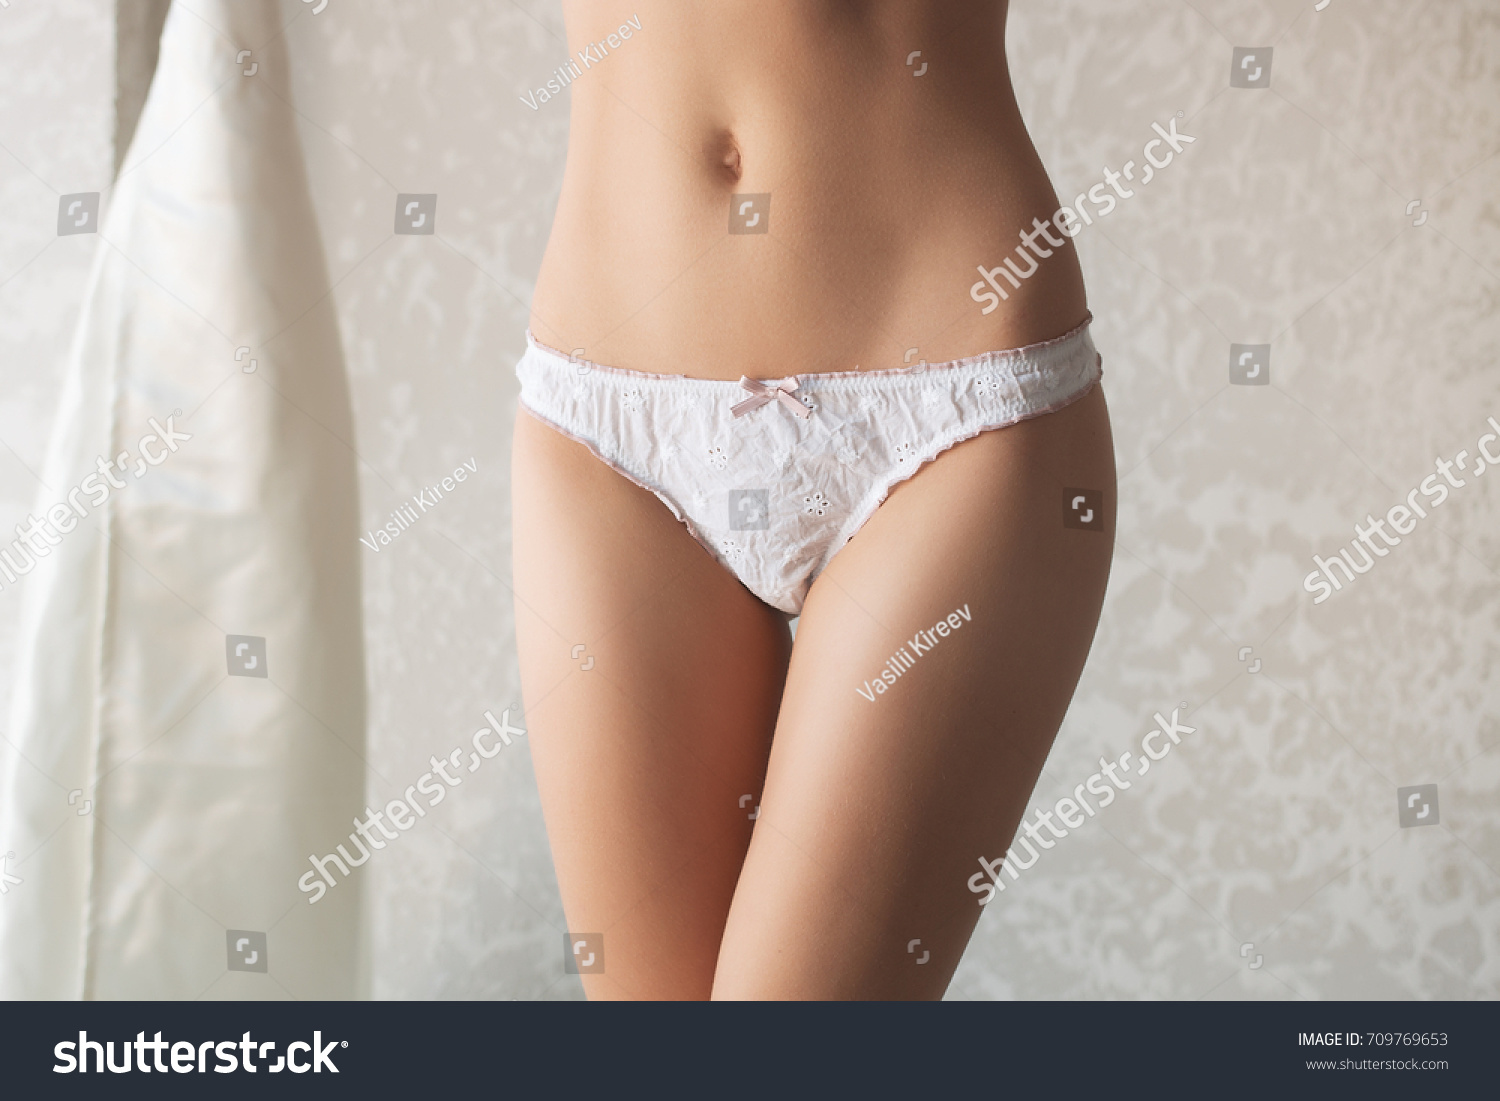 Perfect Womans Body Ideal Woman Naked Stock Photo Edit Now 709769653